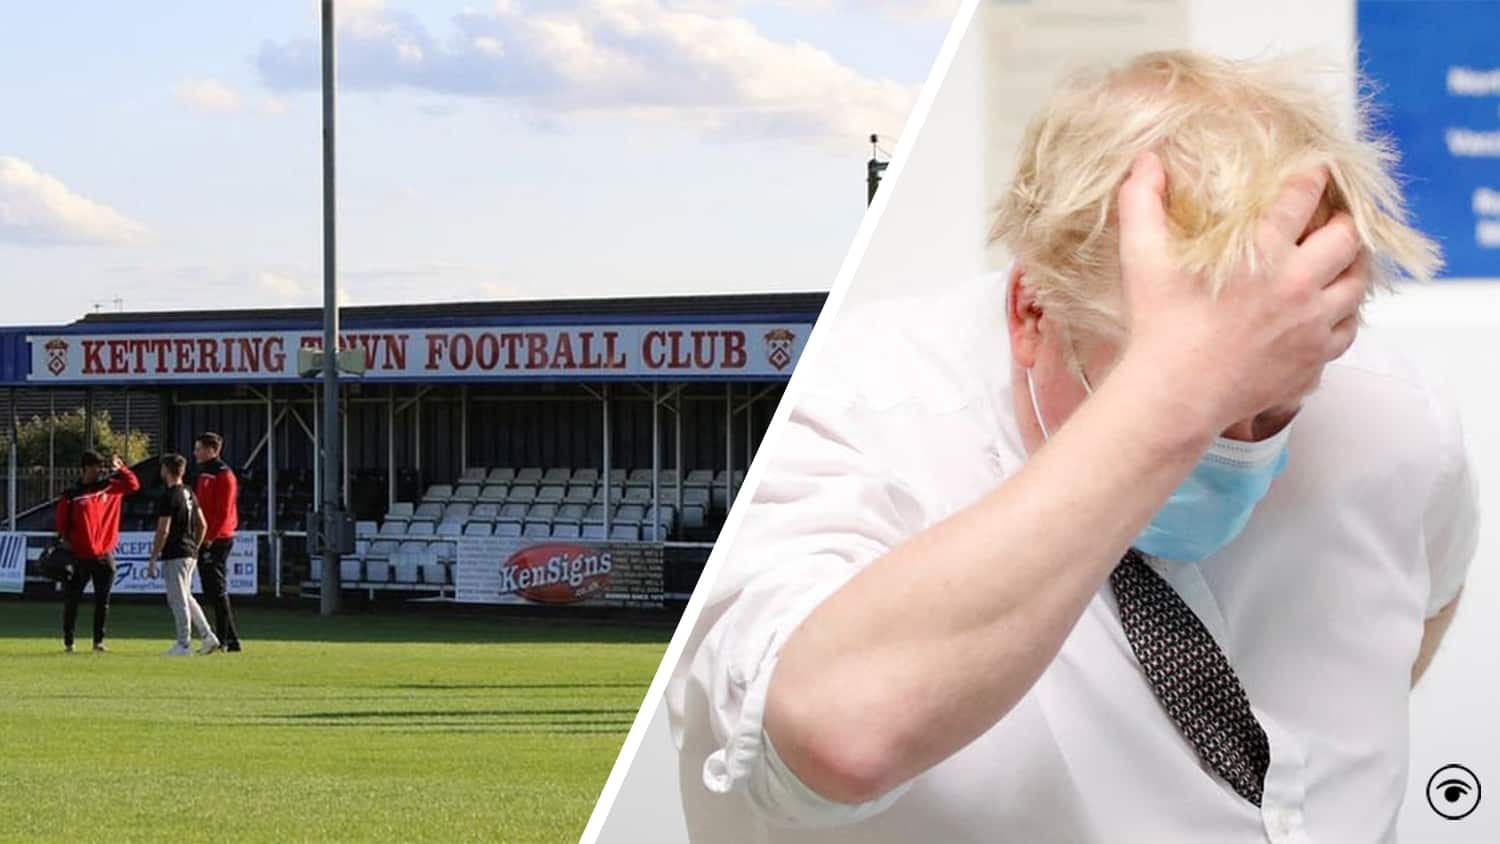 Boris Johnson gets owned by non-league outfit Kettering Town